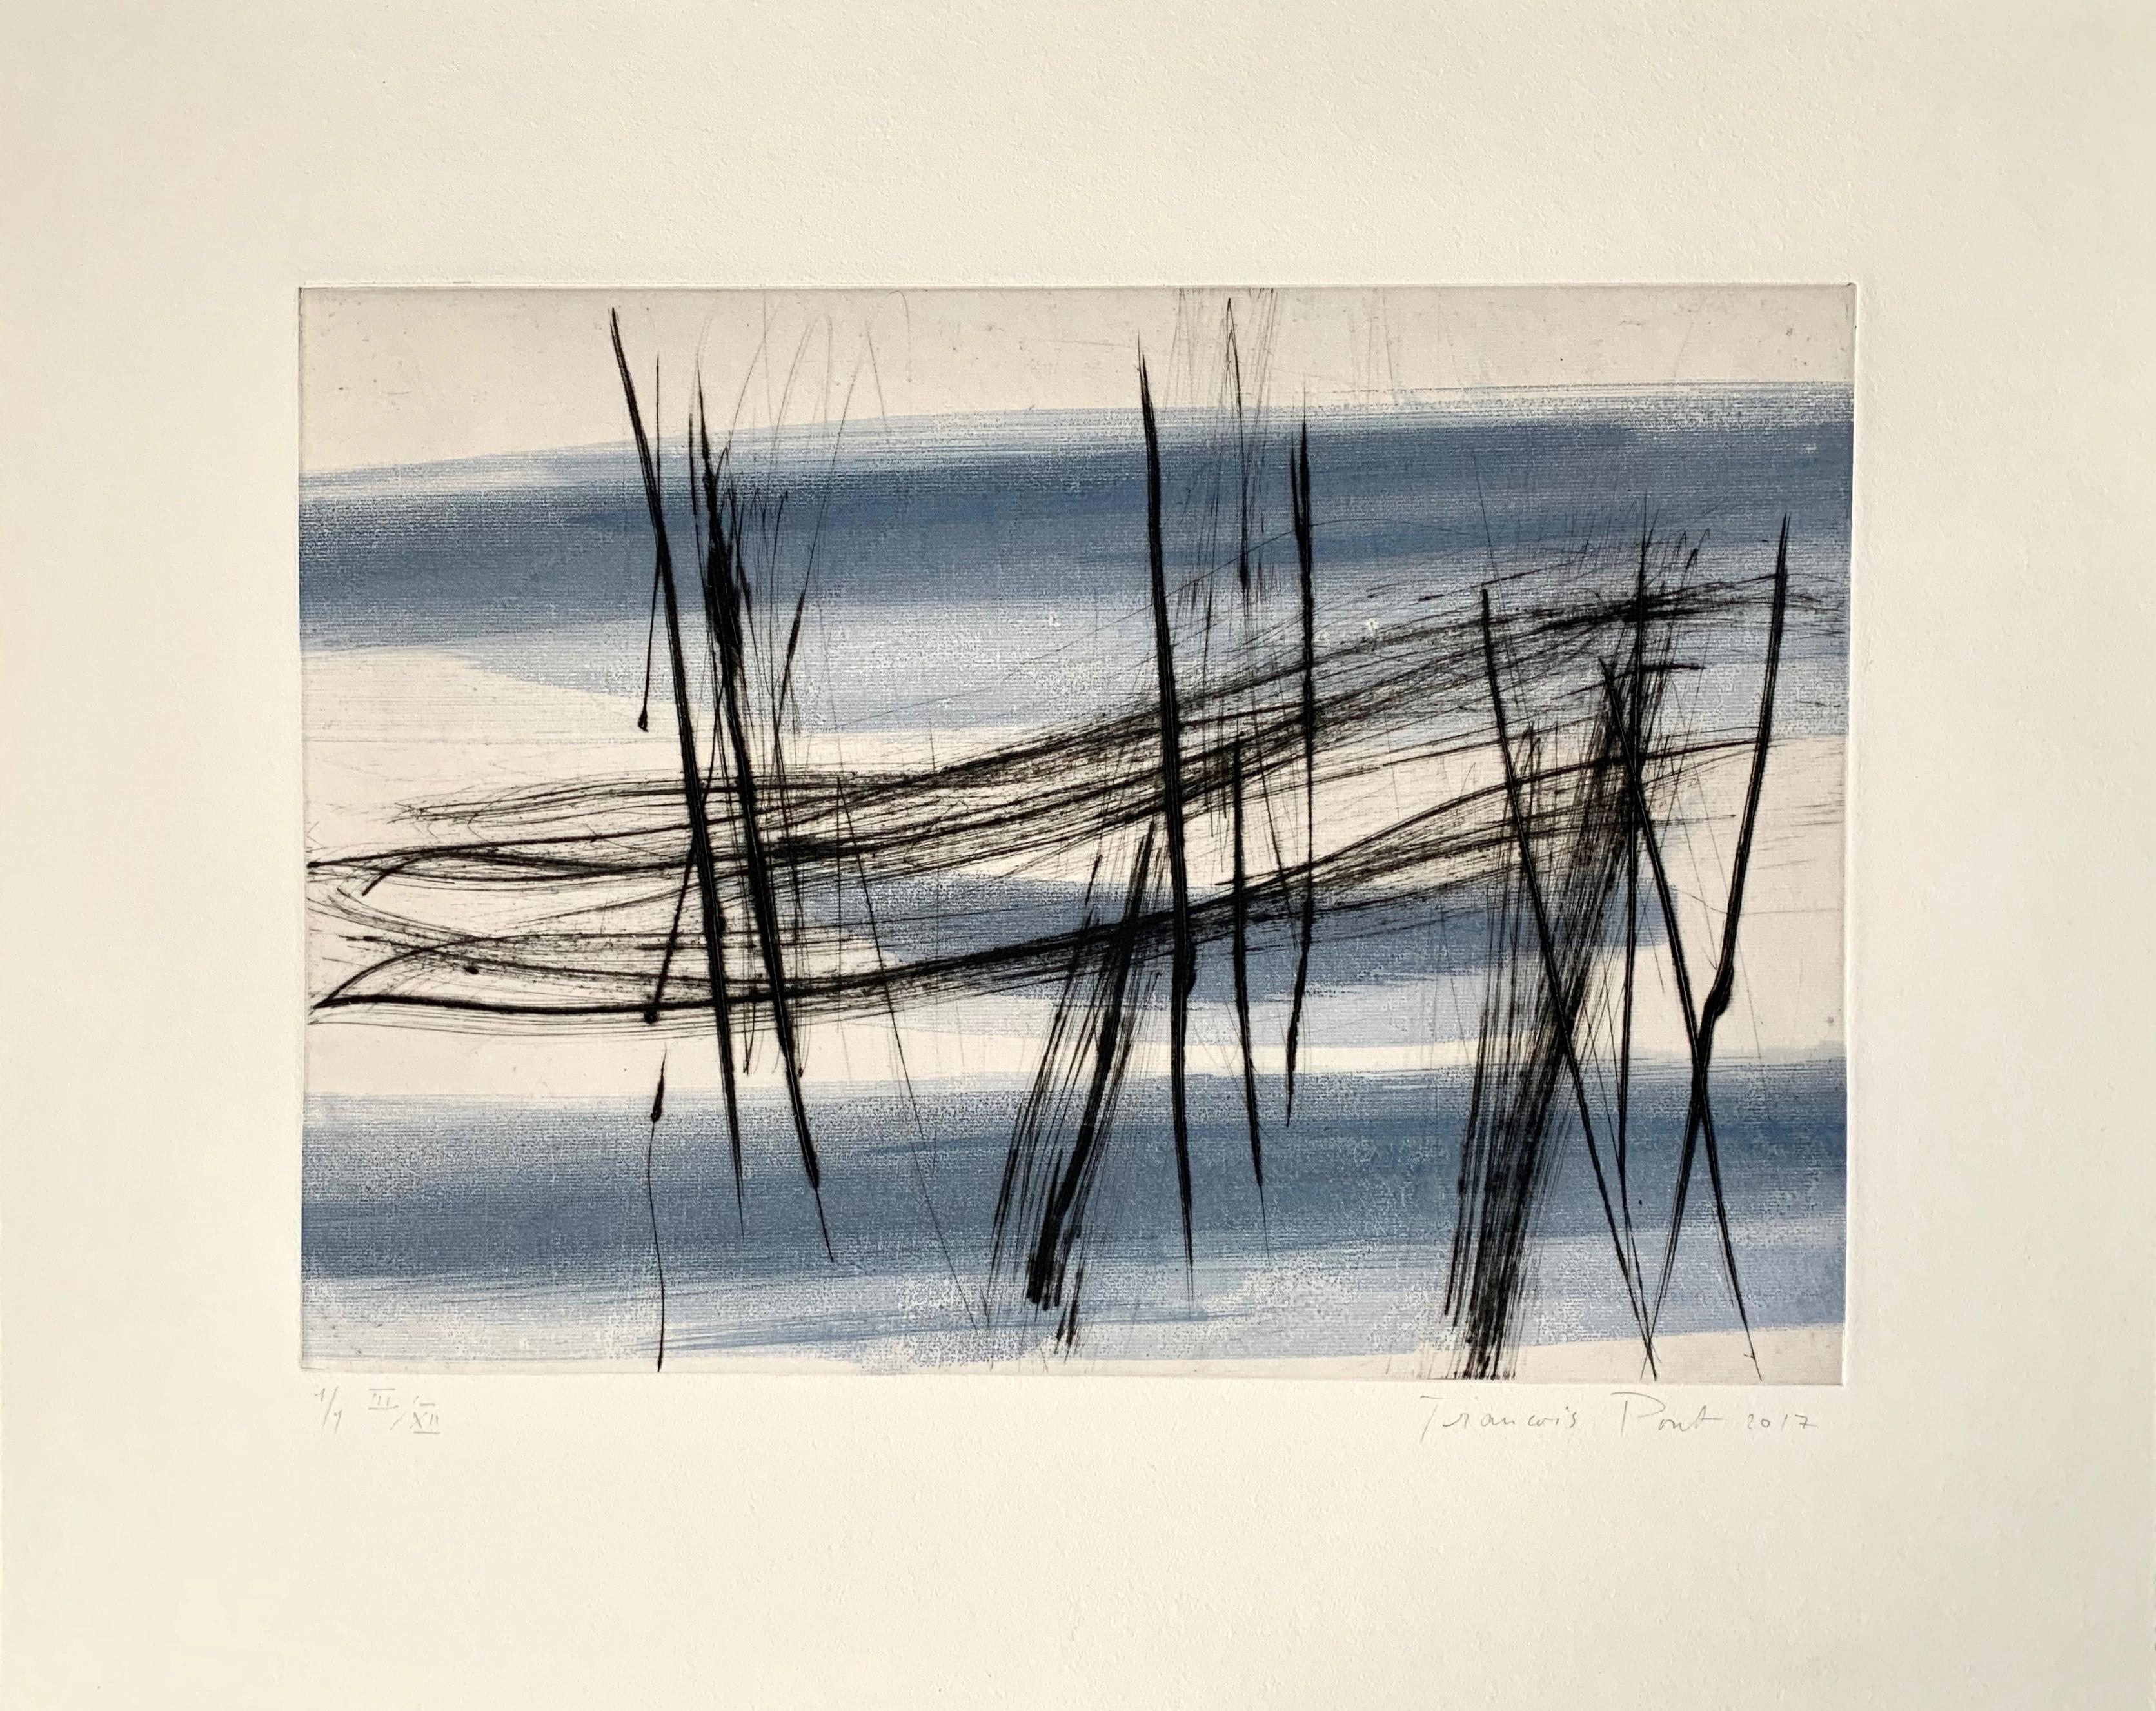 Traversée II, 2015-2017, Dry-point on unique hand-painted chine collé, Limited Edition number 3 of 12, 11 2/5 × 16 1/10 in, 29 × 41 cm by François Pont

Using black ink, anthracite charcoals and thin washes of fresh, dancing colour, François Pont’s